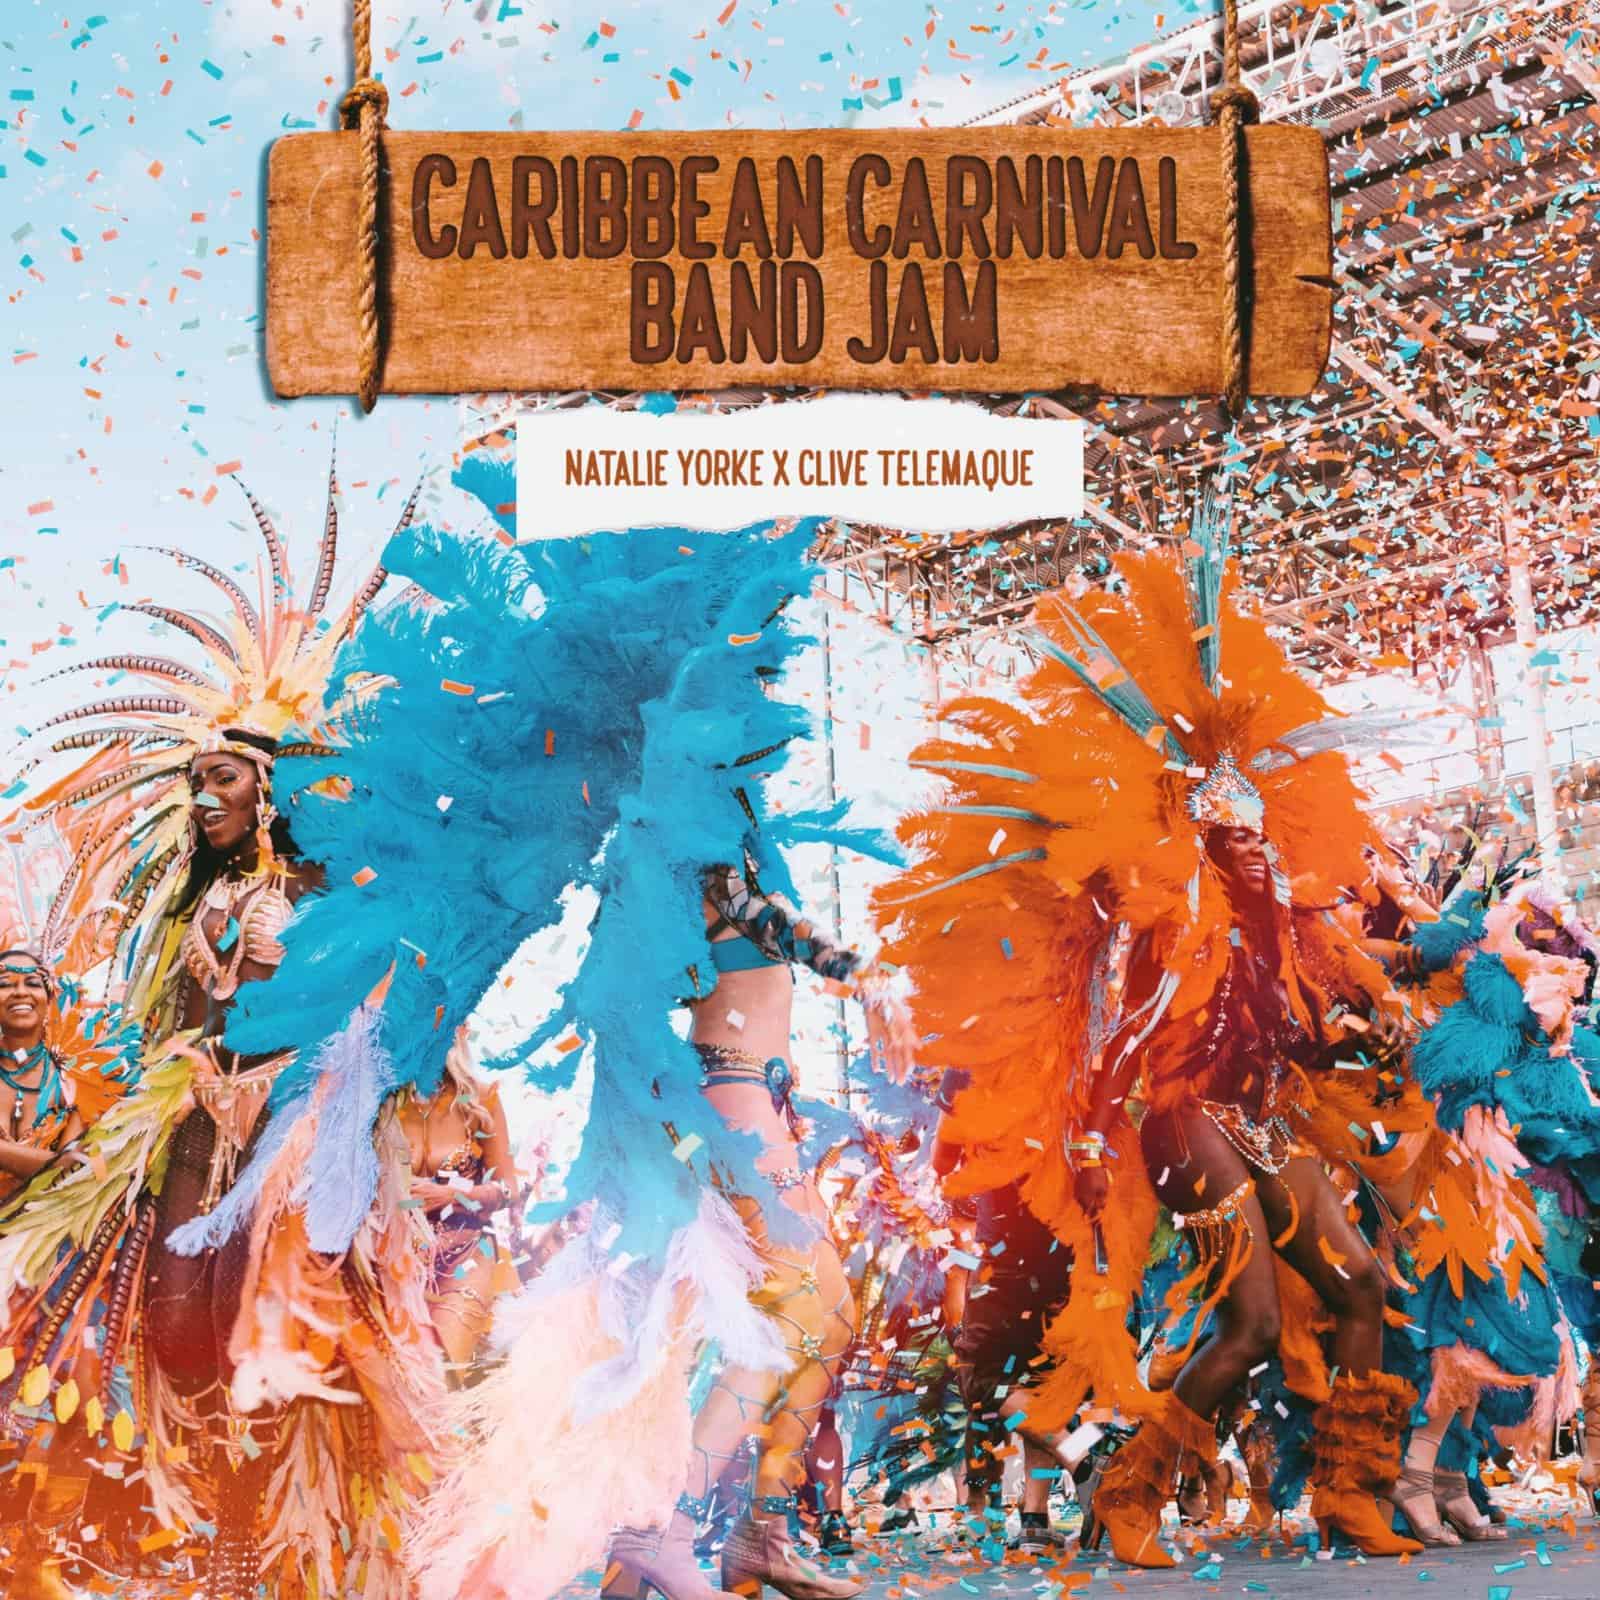 Natalie Yorke X Clive Telemaque - Caribbean Carnival Band Jam